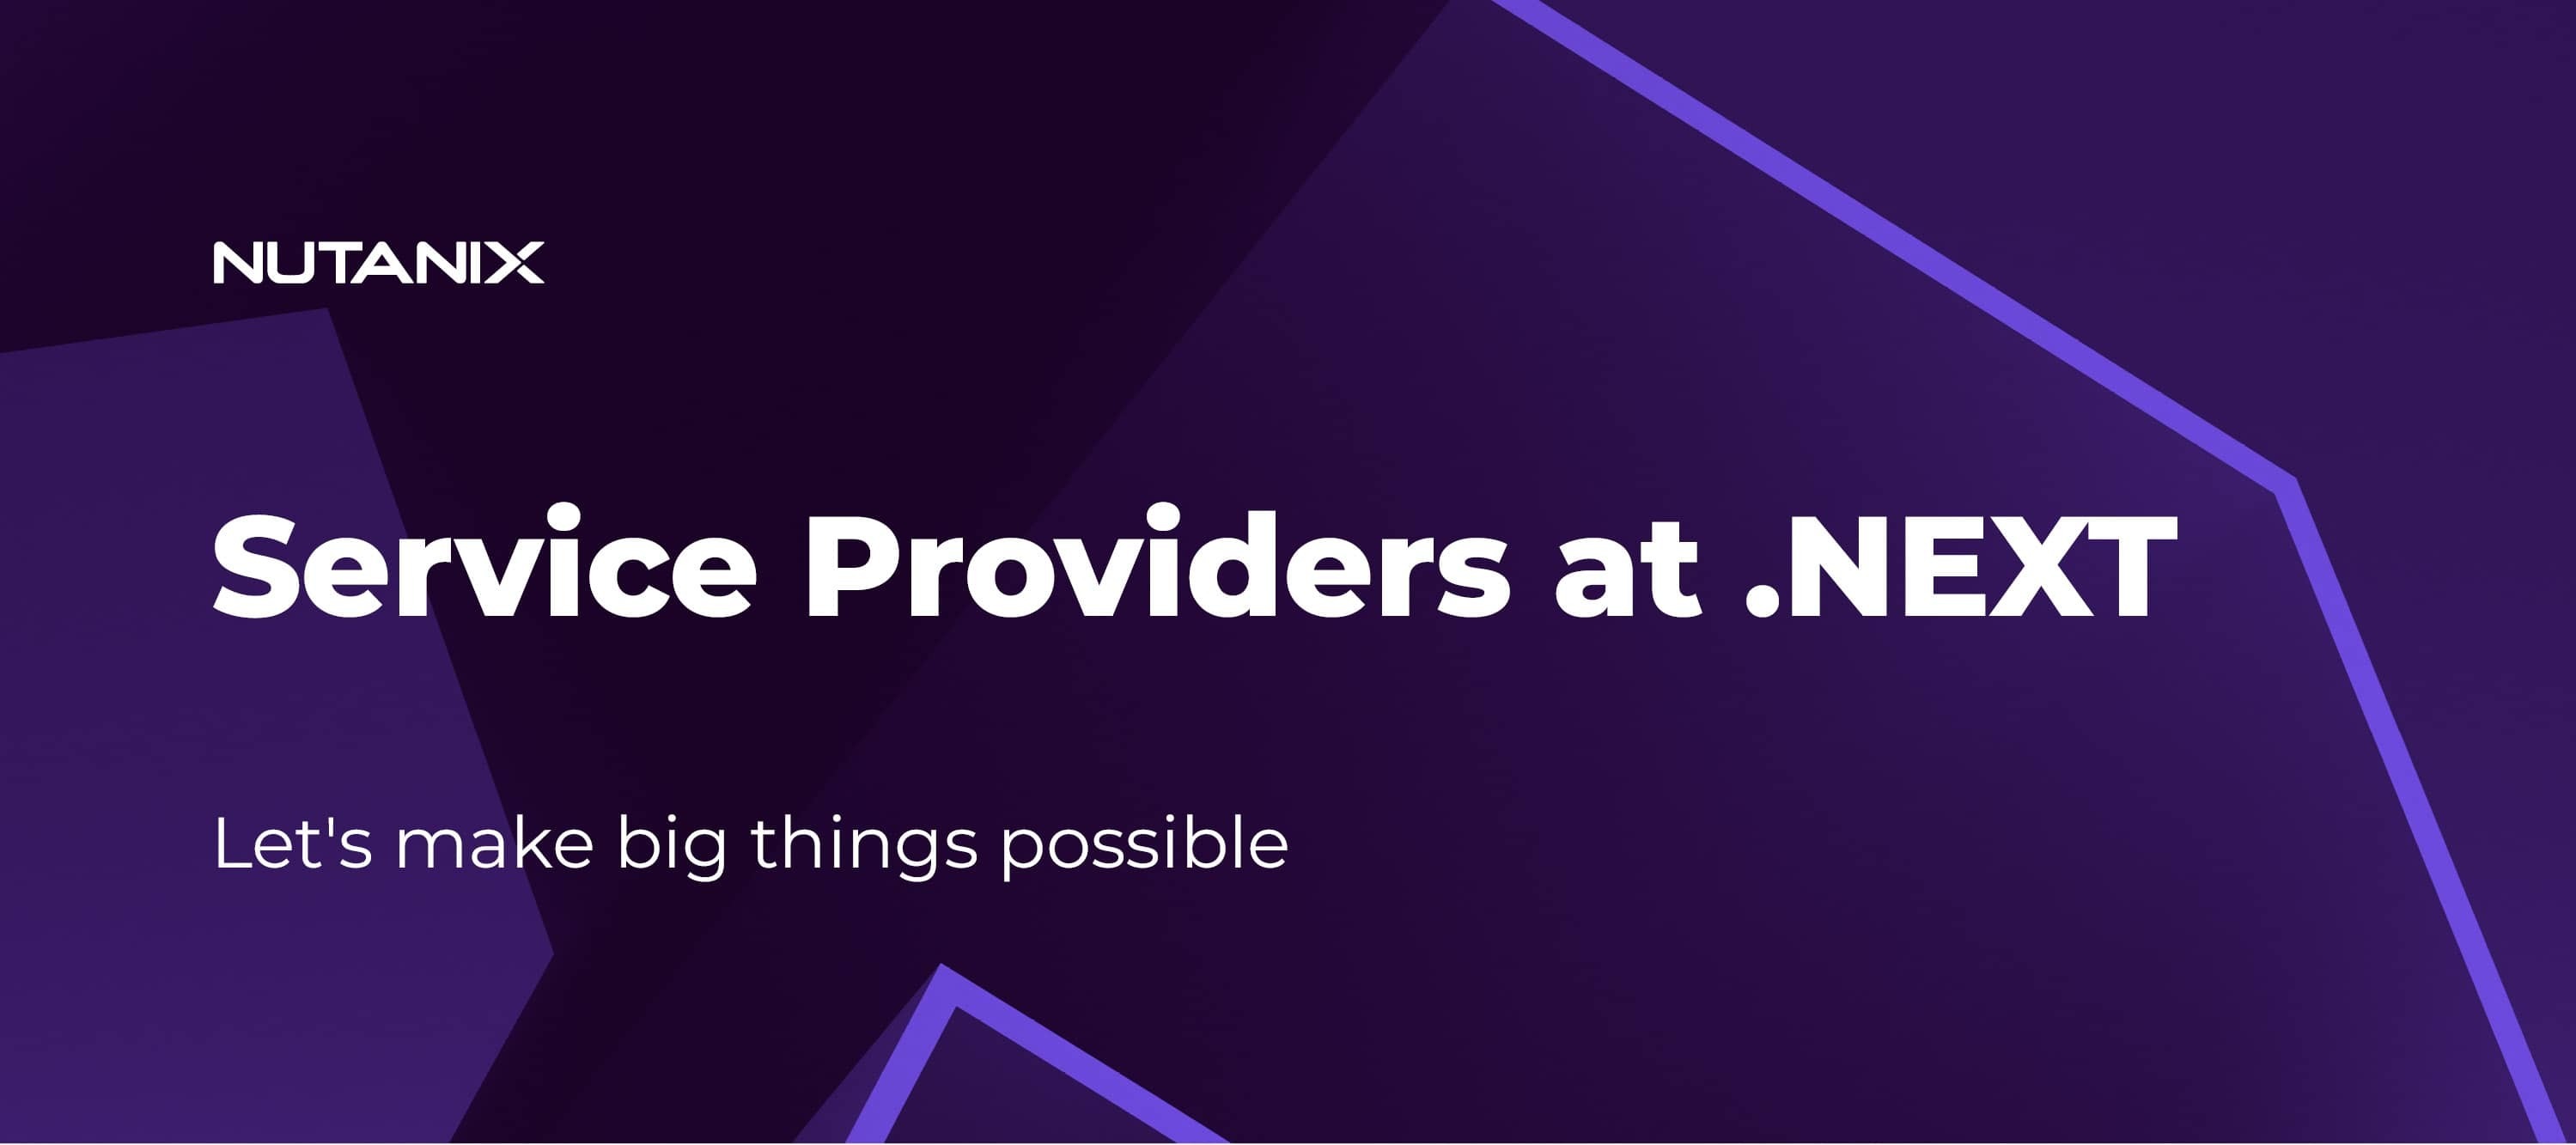 Service Providers at .NEXT